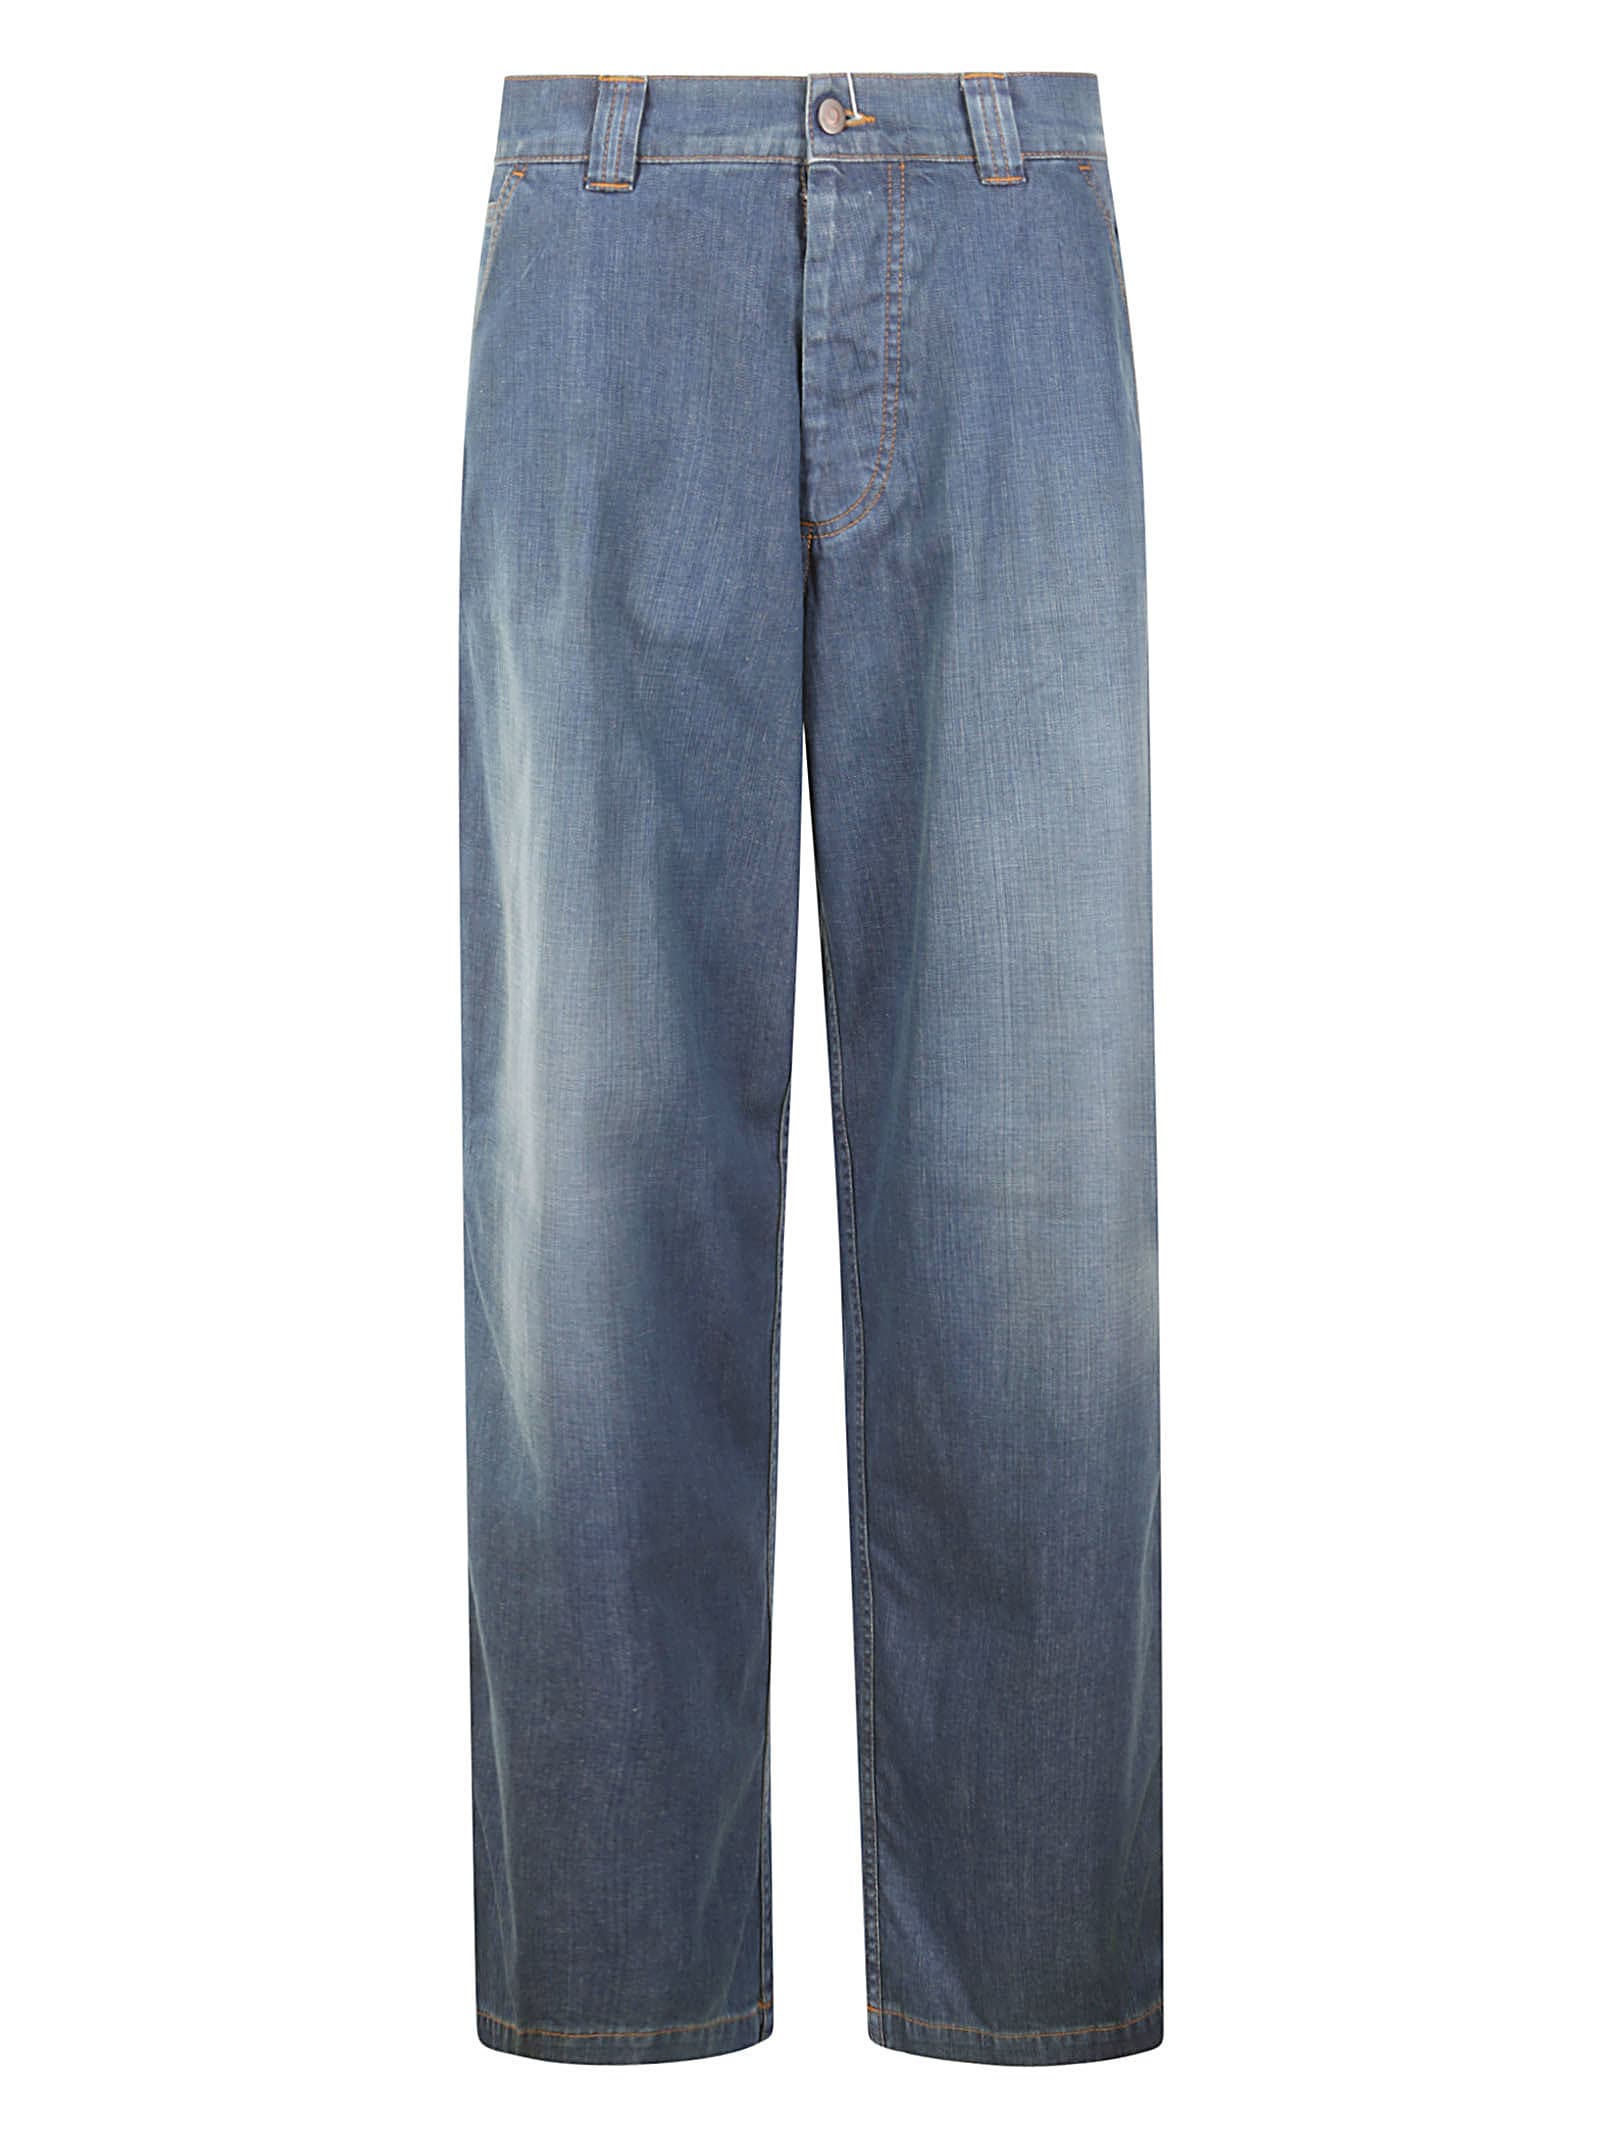 Maison Margiela Trousers 5 Pockets In American Classic